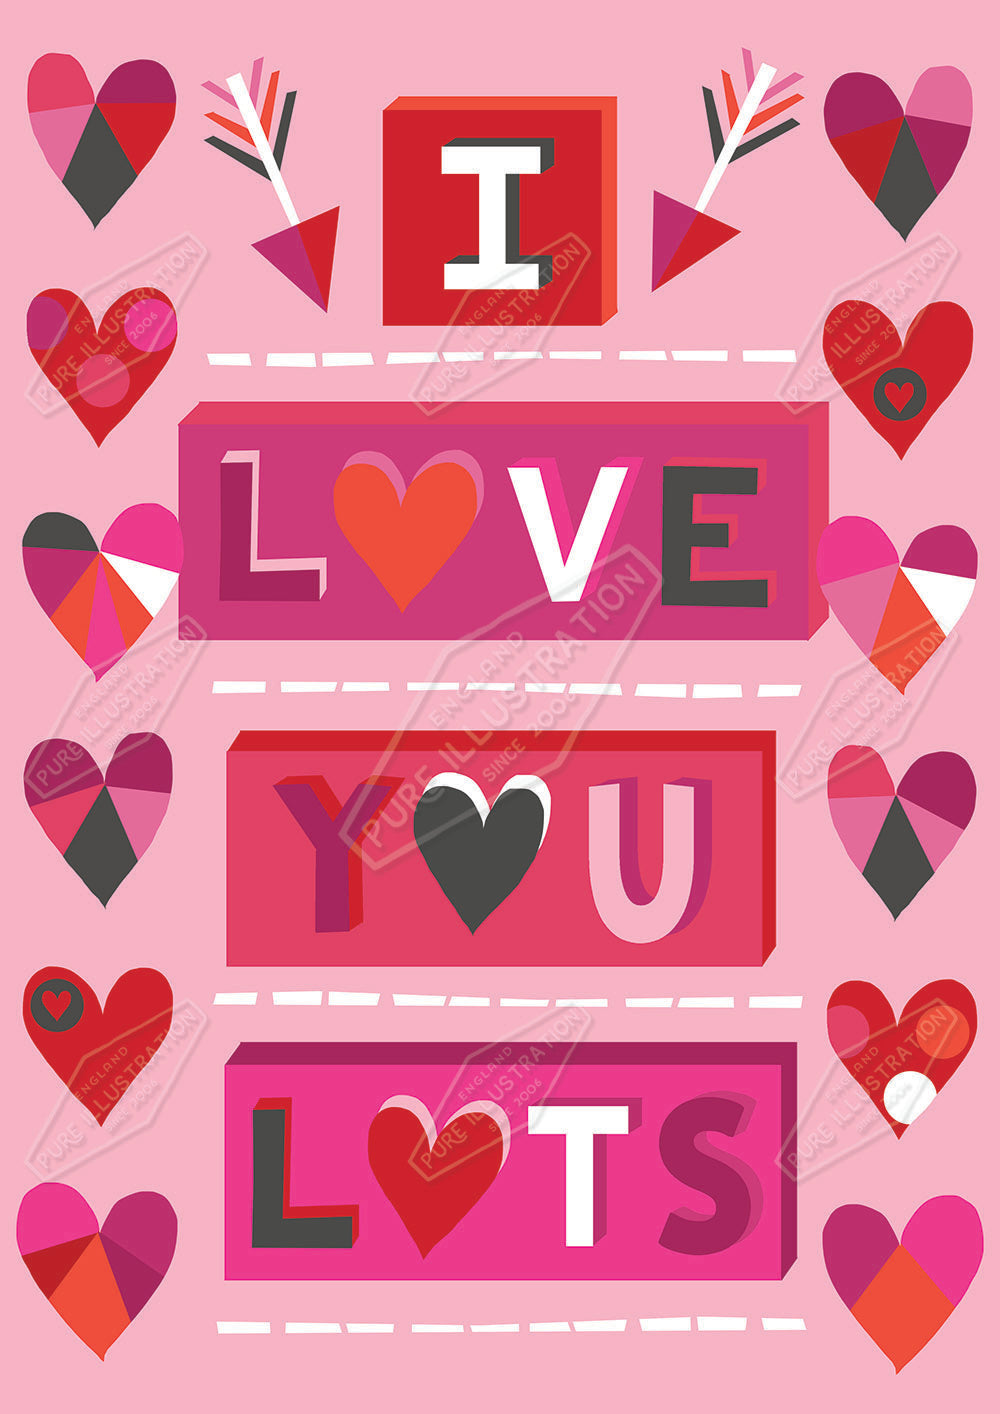 00030146KSP- Kerry Spurling is represented by Pure Art Licensing Agency - Valentine's Greeting Card Design